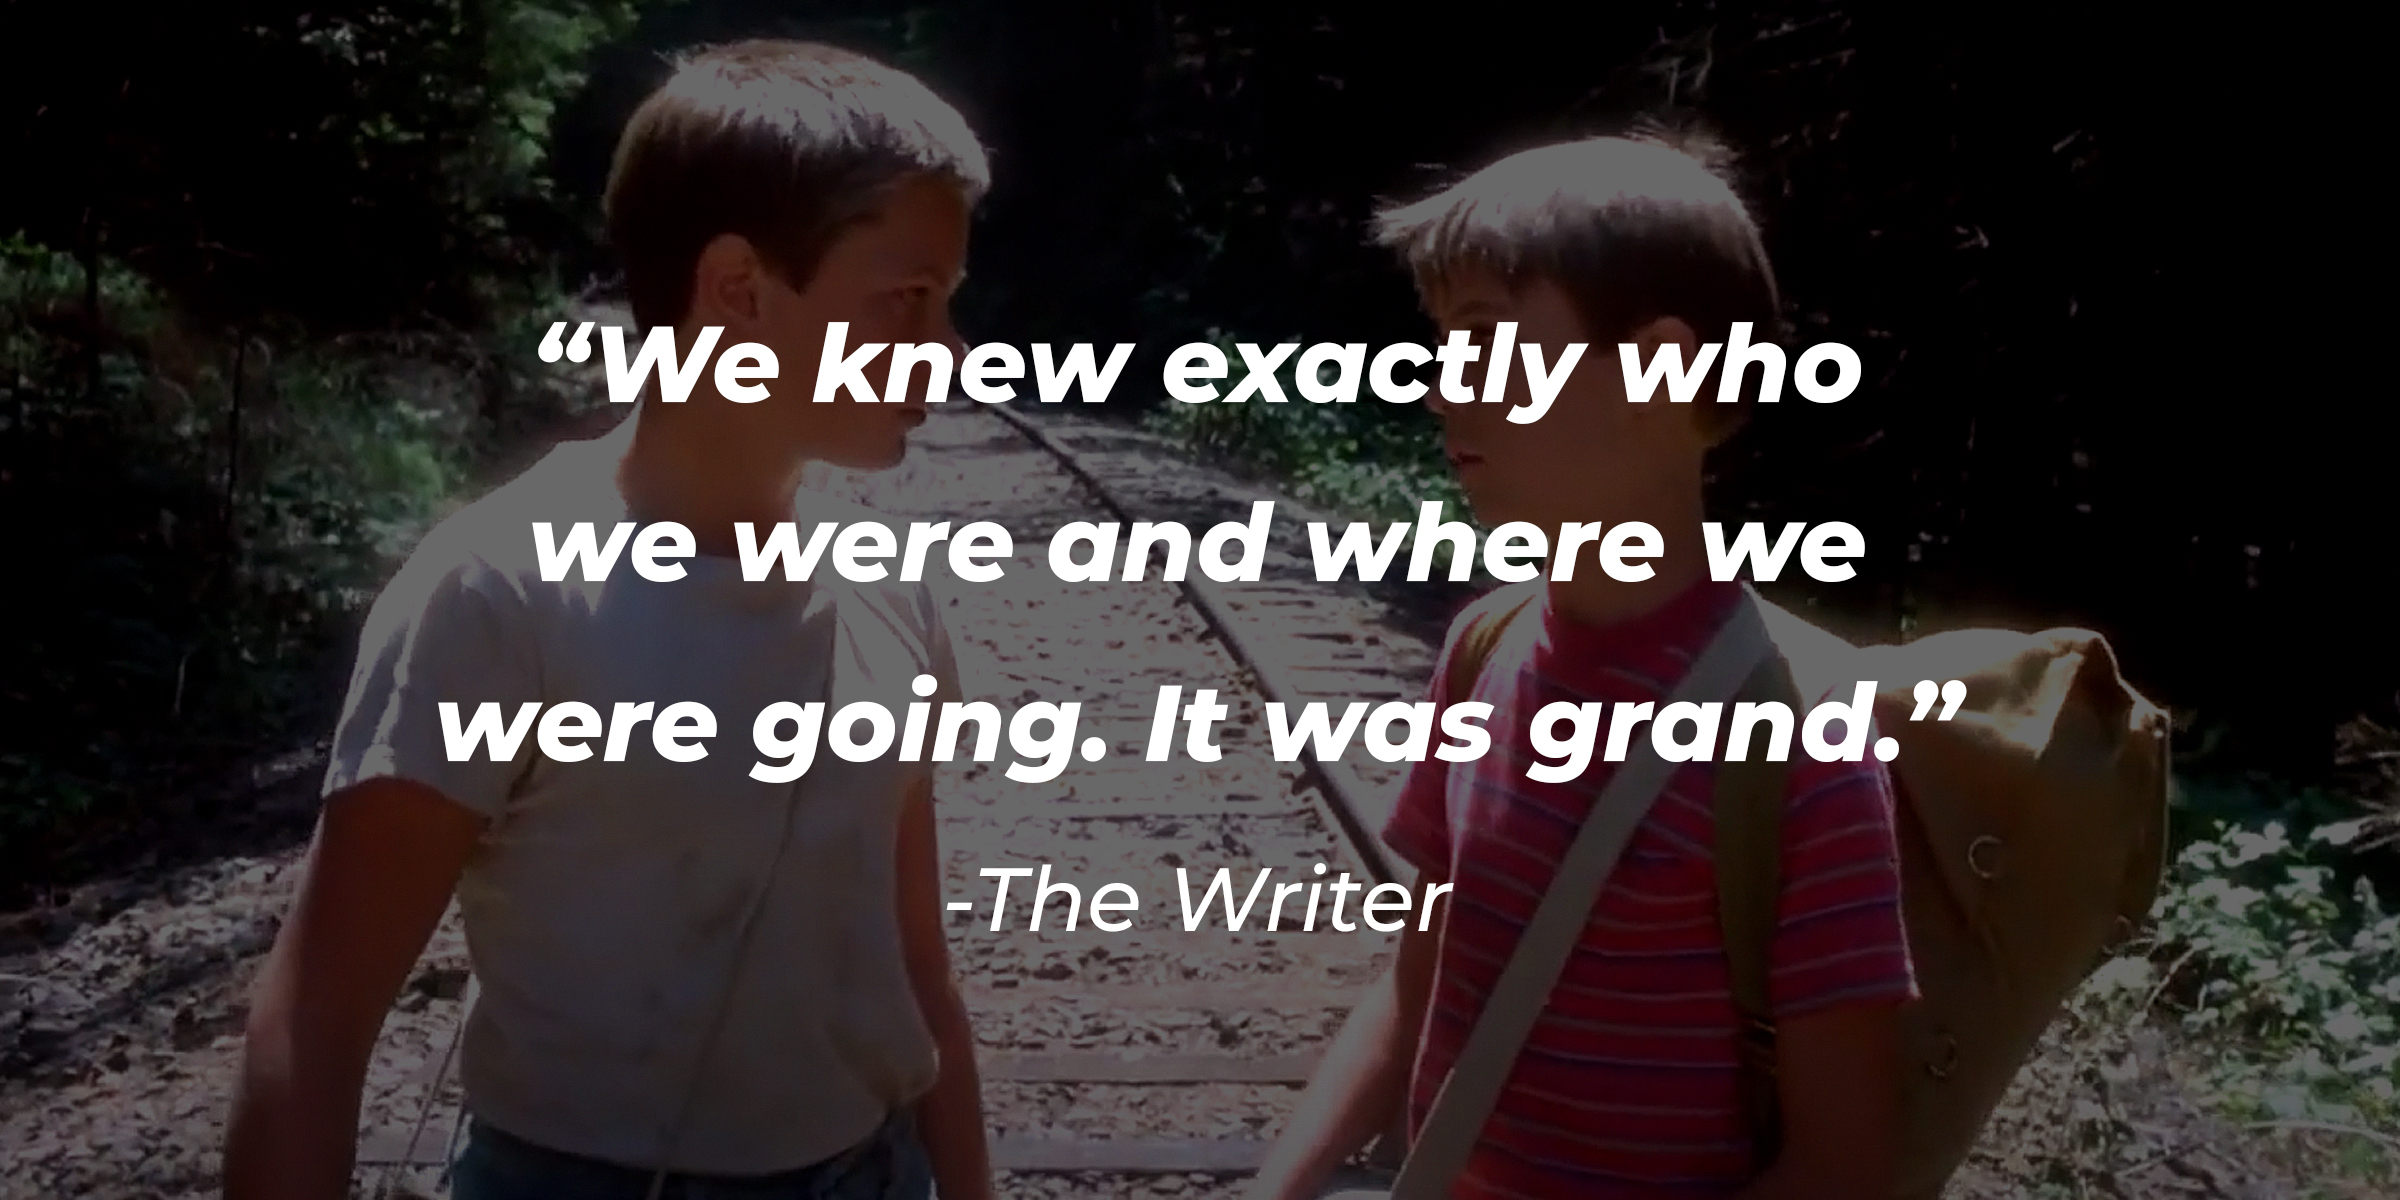 Characters from "Stand By Me," with the Writer’s quote: “We knew exactly who we were and where we were going. It was grand.” | Source: Facebook.com/standbymemovie